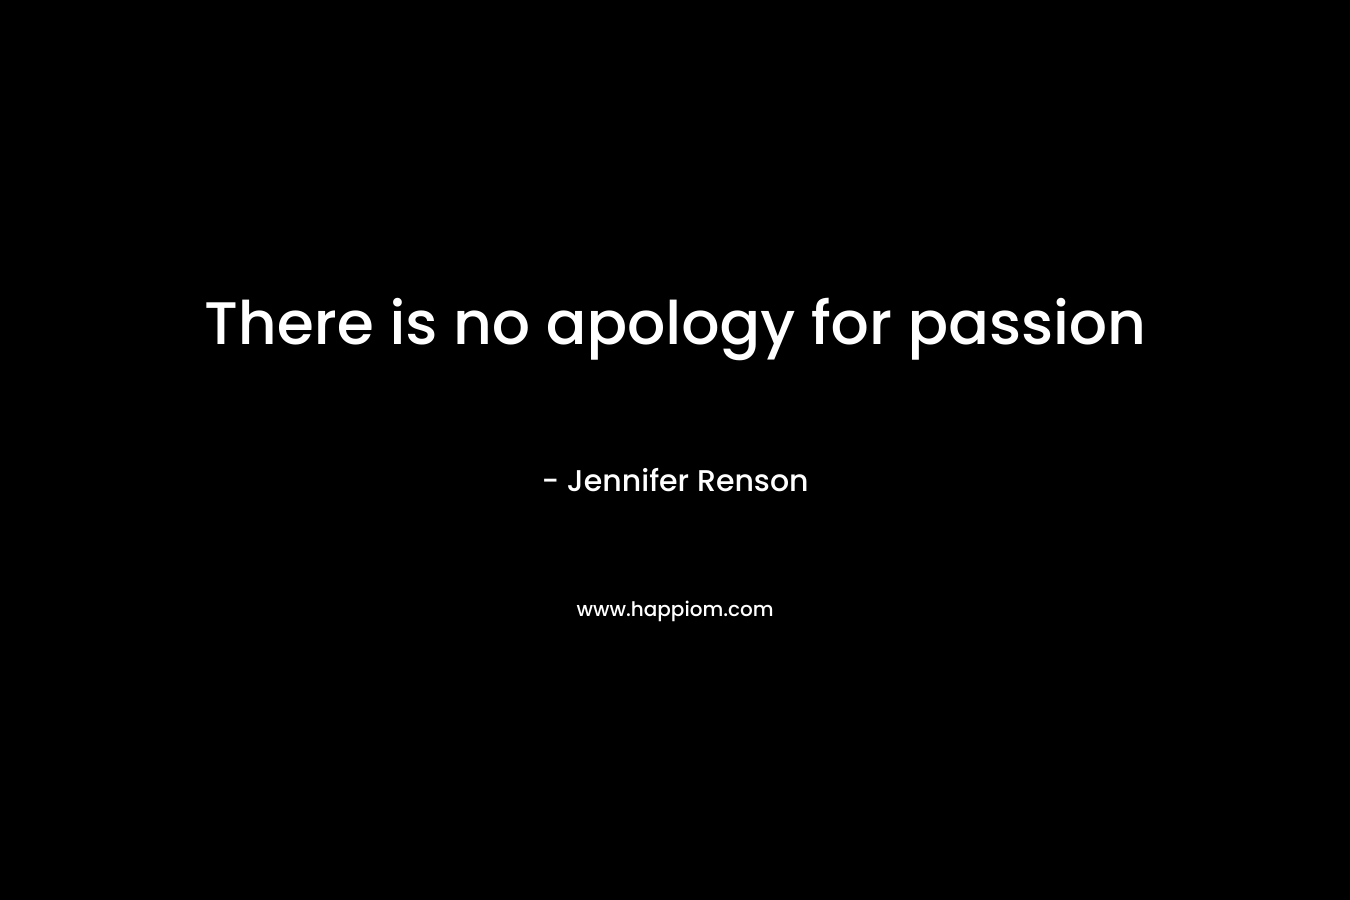 There is no apology for passion